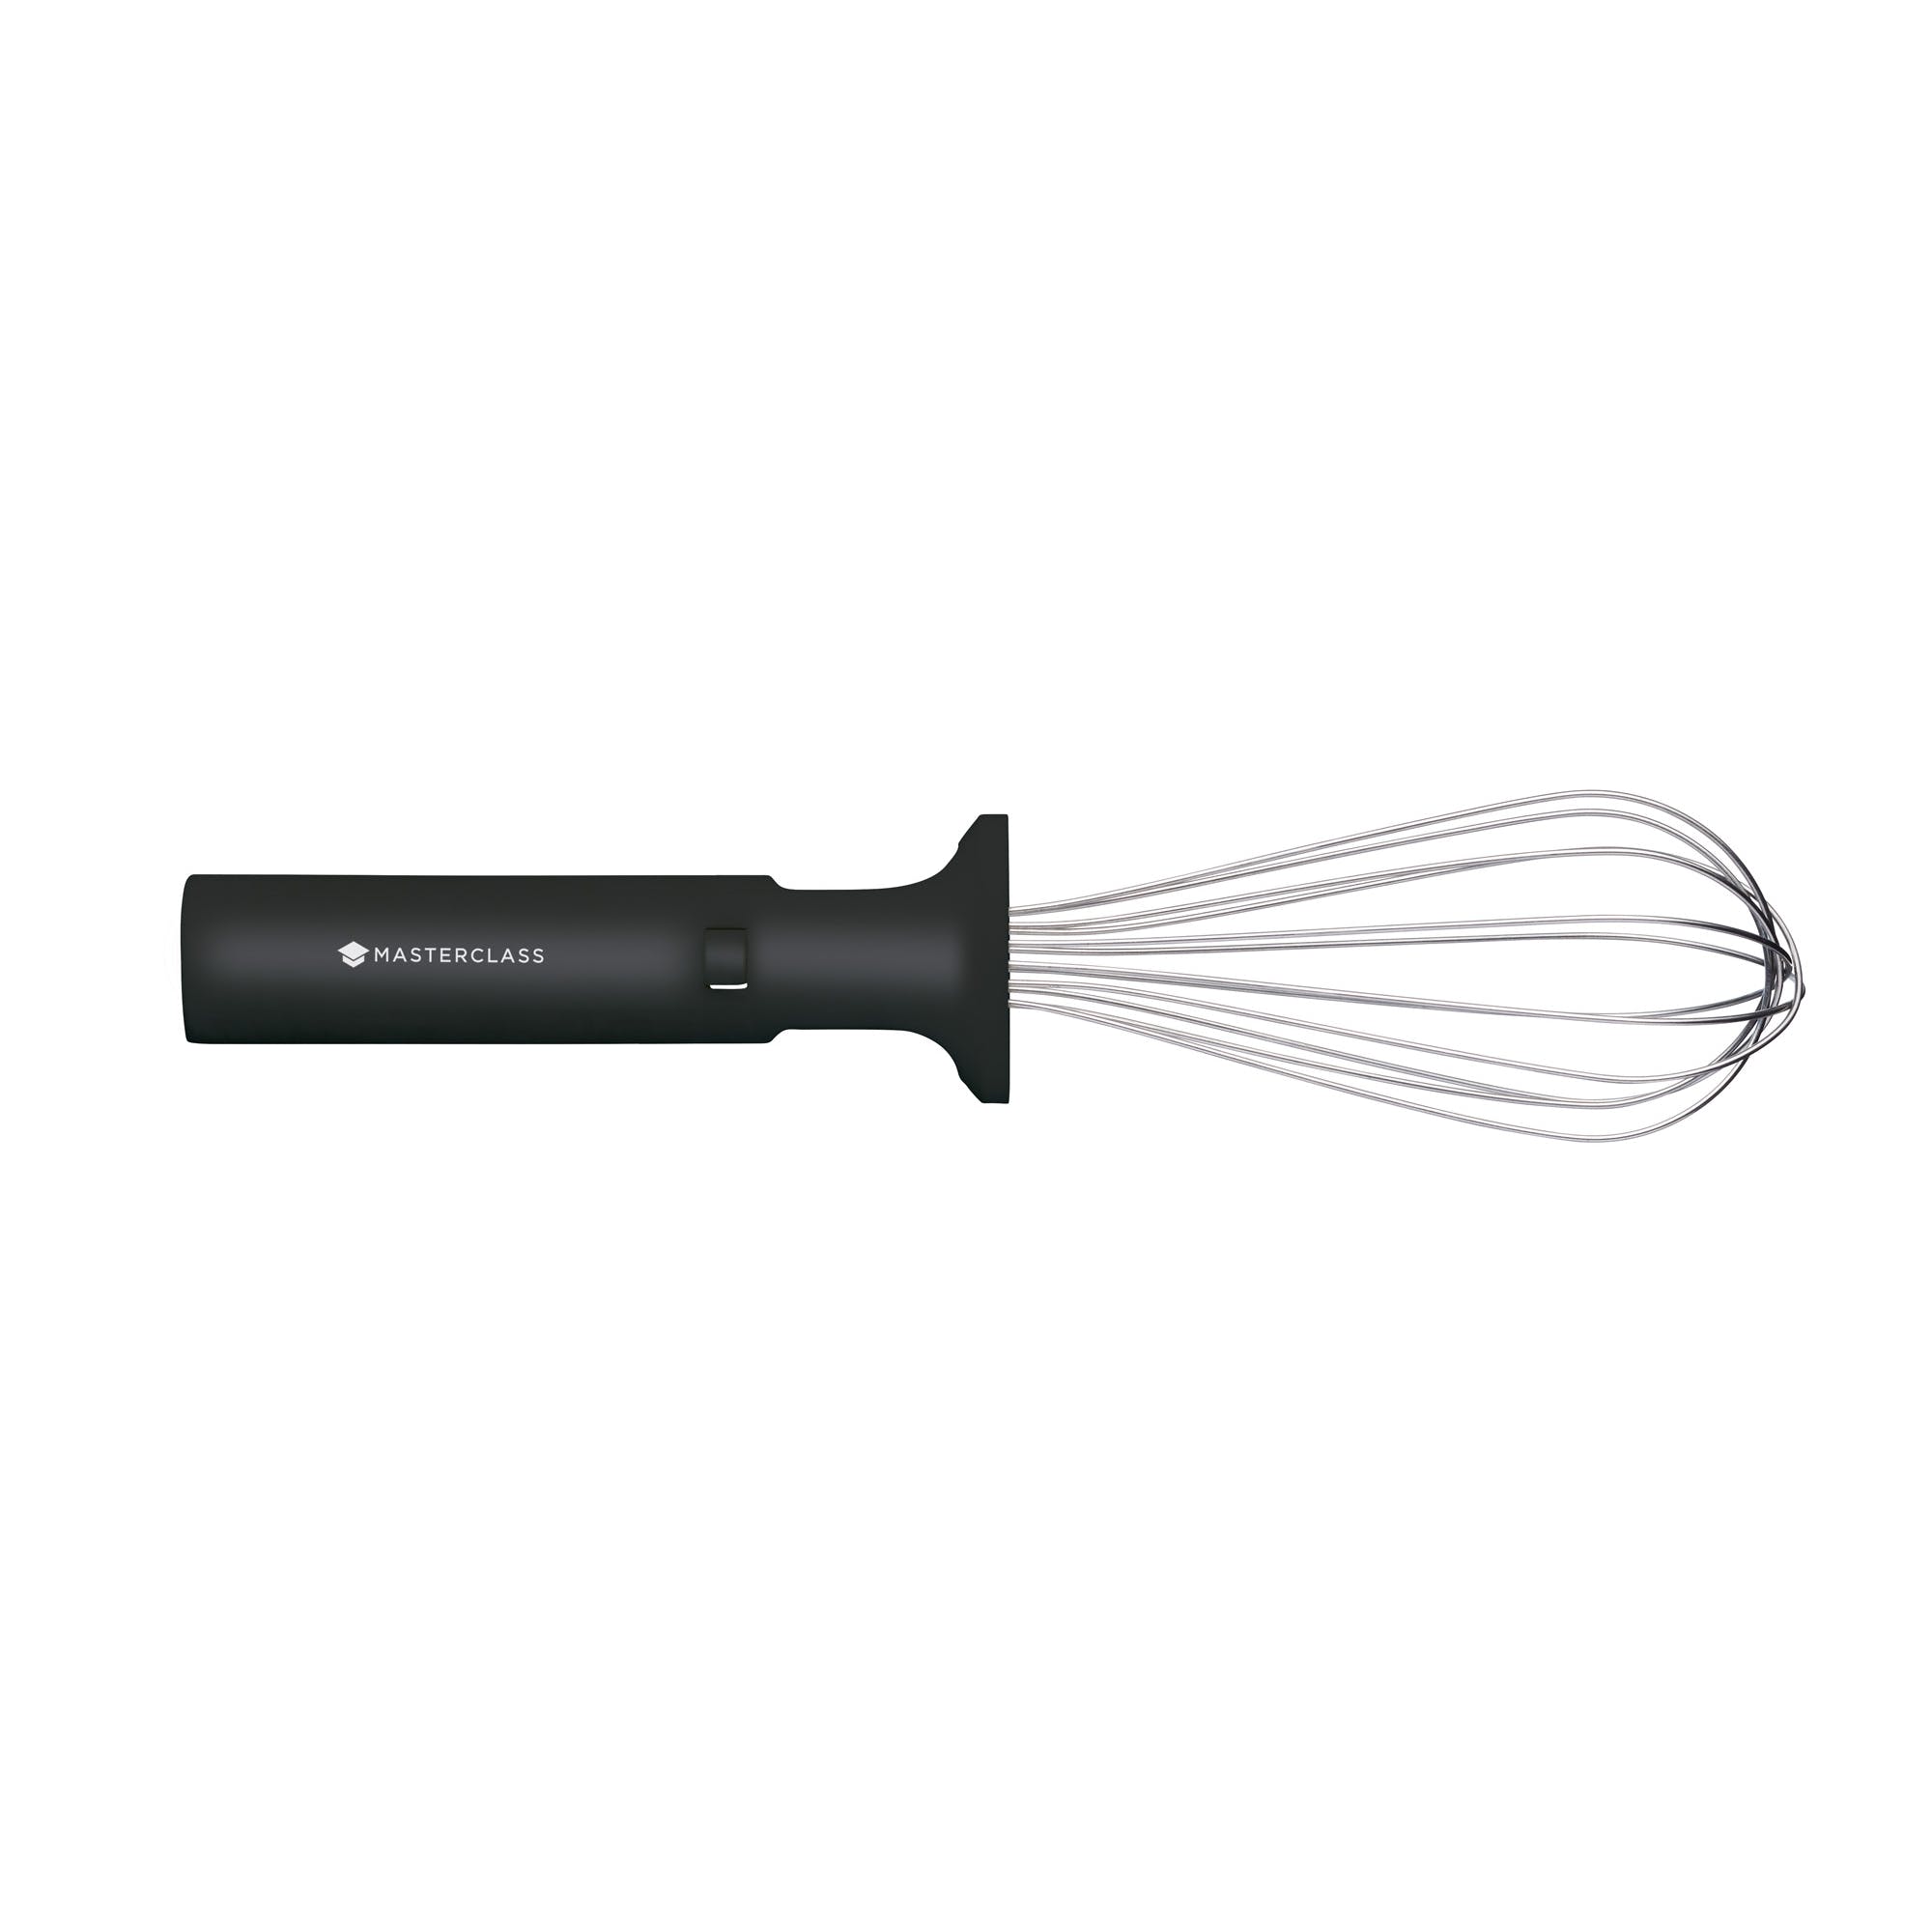 MasterClass Smart Space Stainless Steel Handheld Cooking Whisk - The Cooks Cupboard Ltd